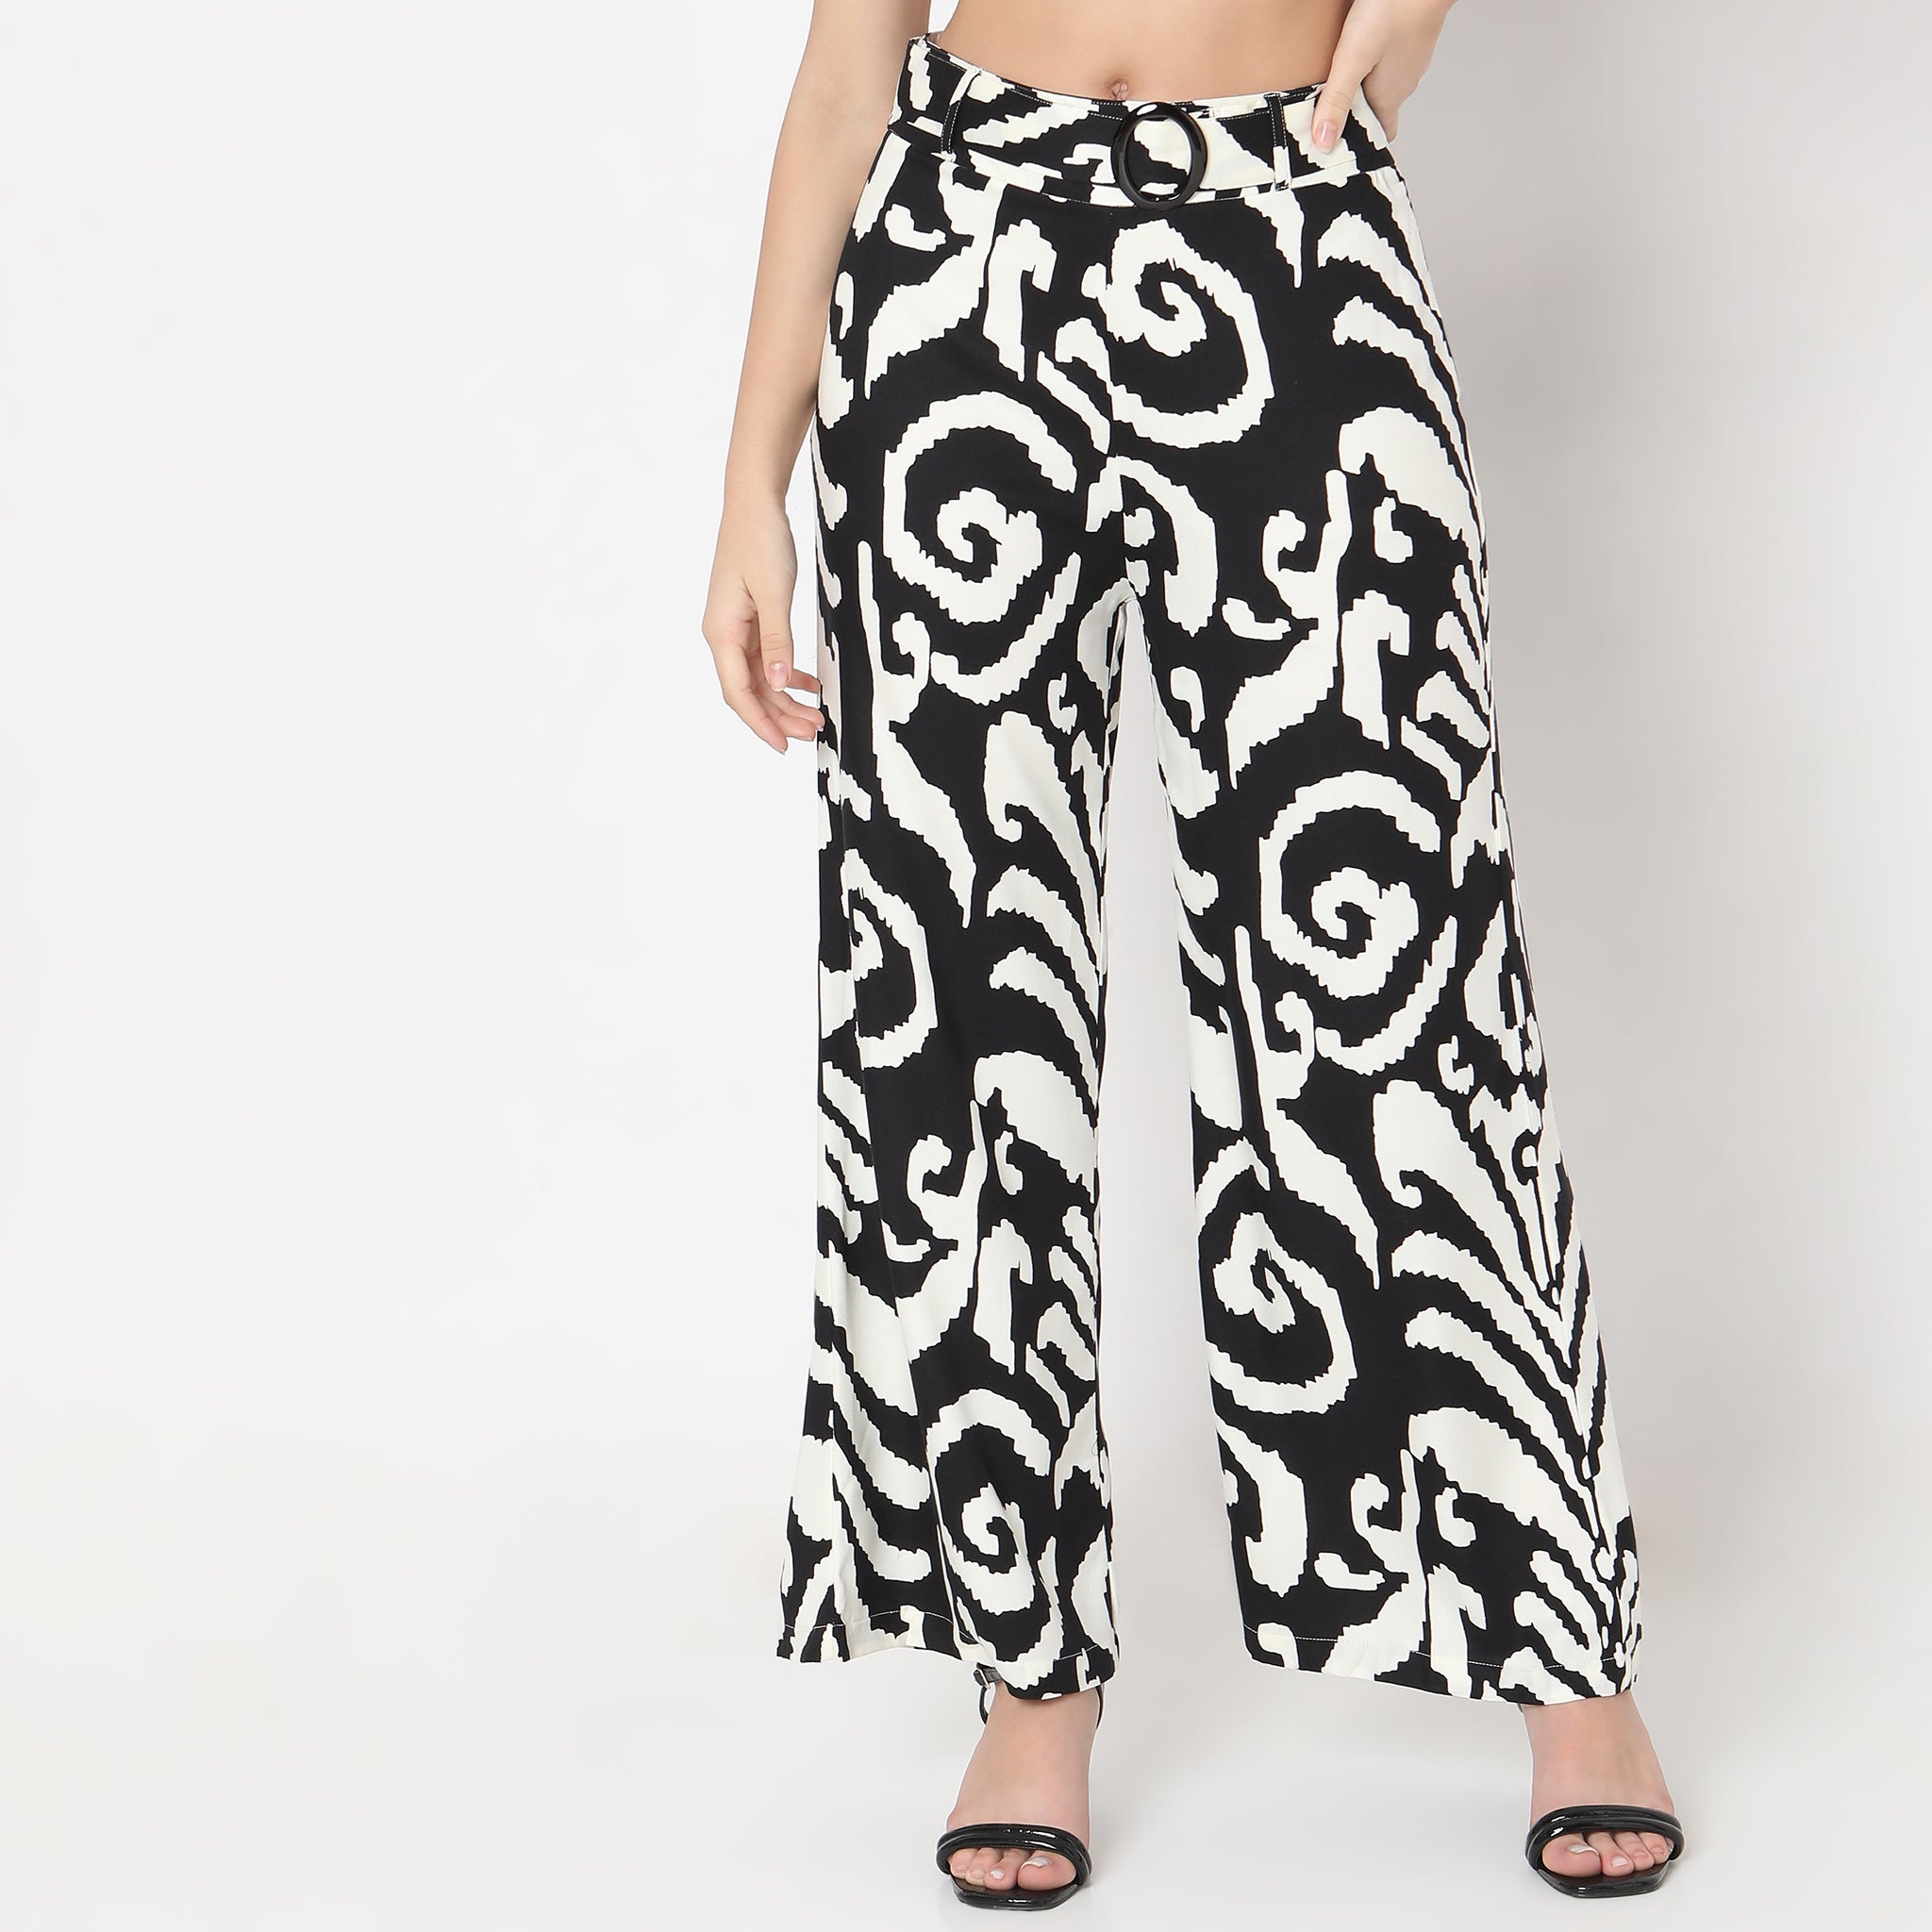 Palazzo Pants For Women: Buy Women Palazzo Online in India - Style